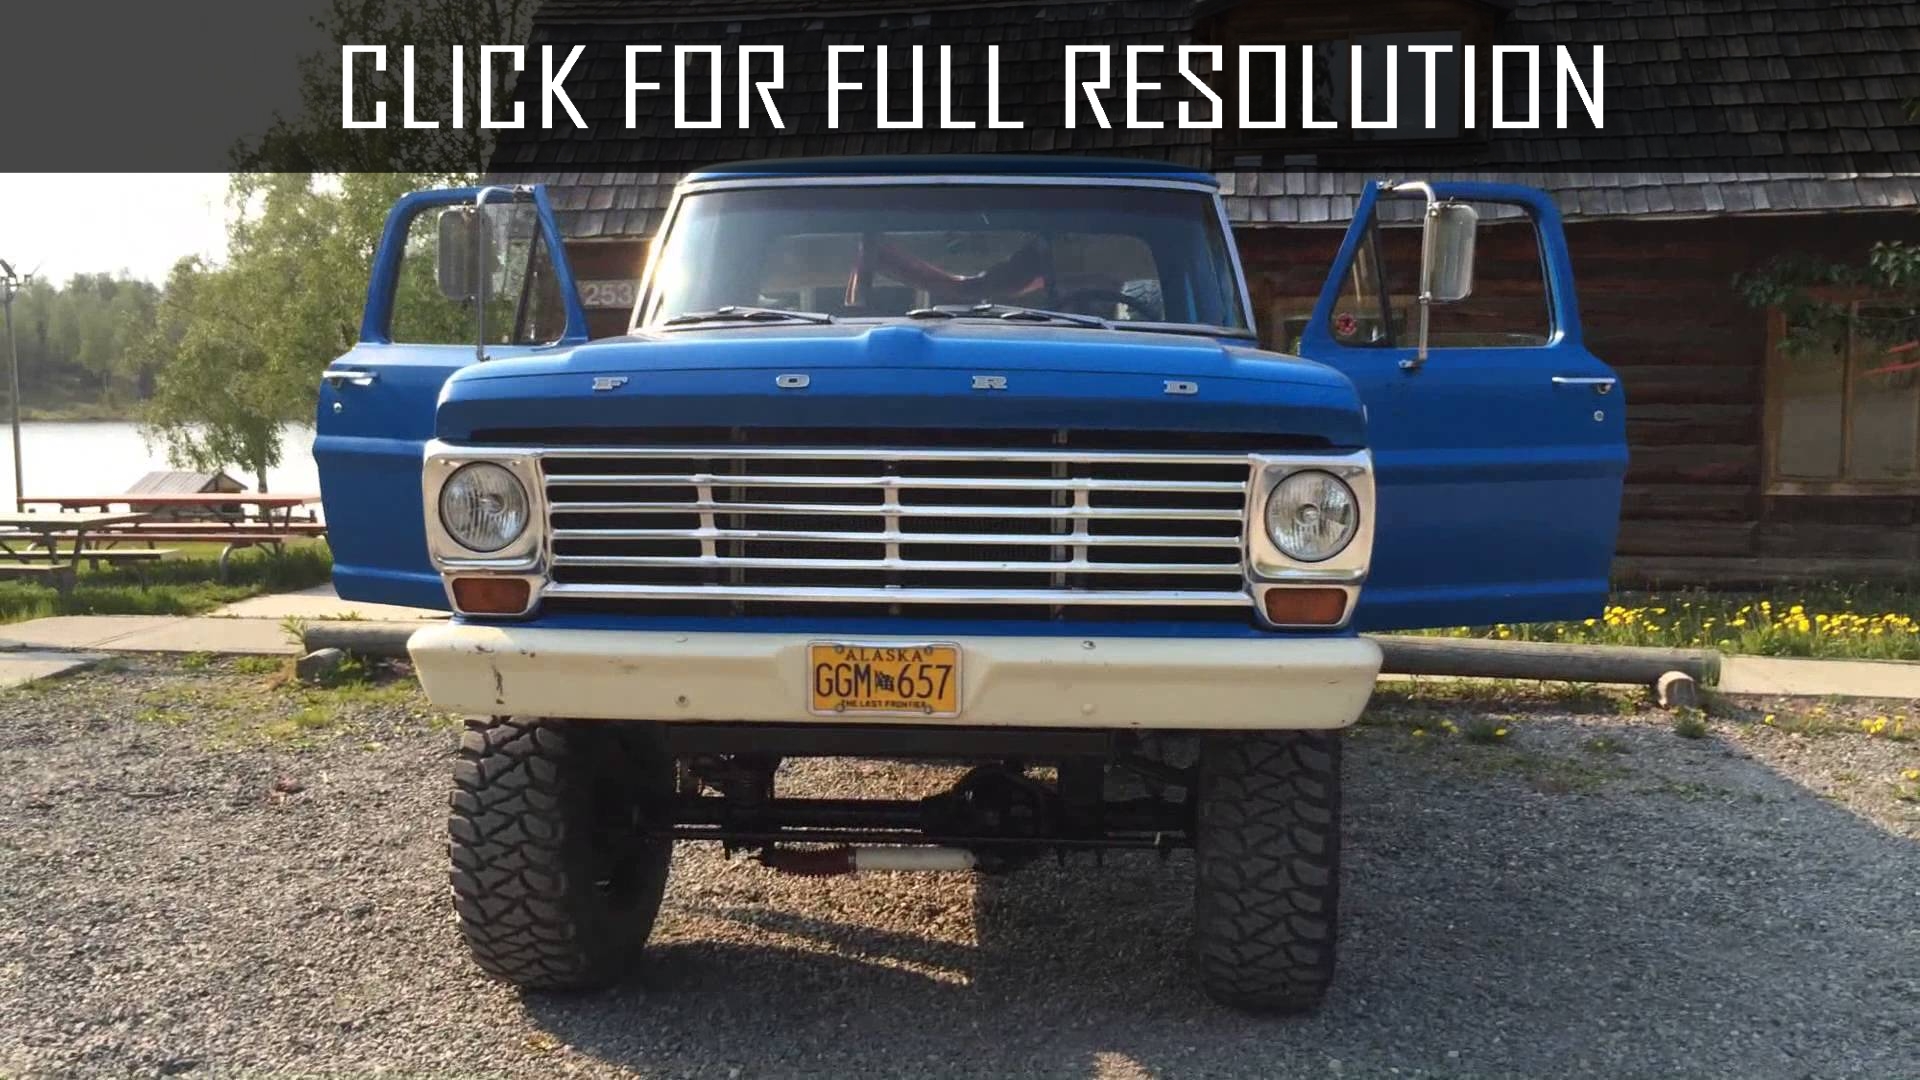 1976 Ford F250 4x4